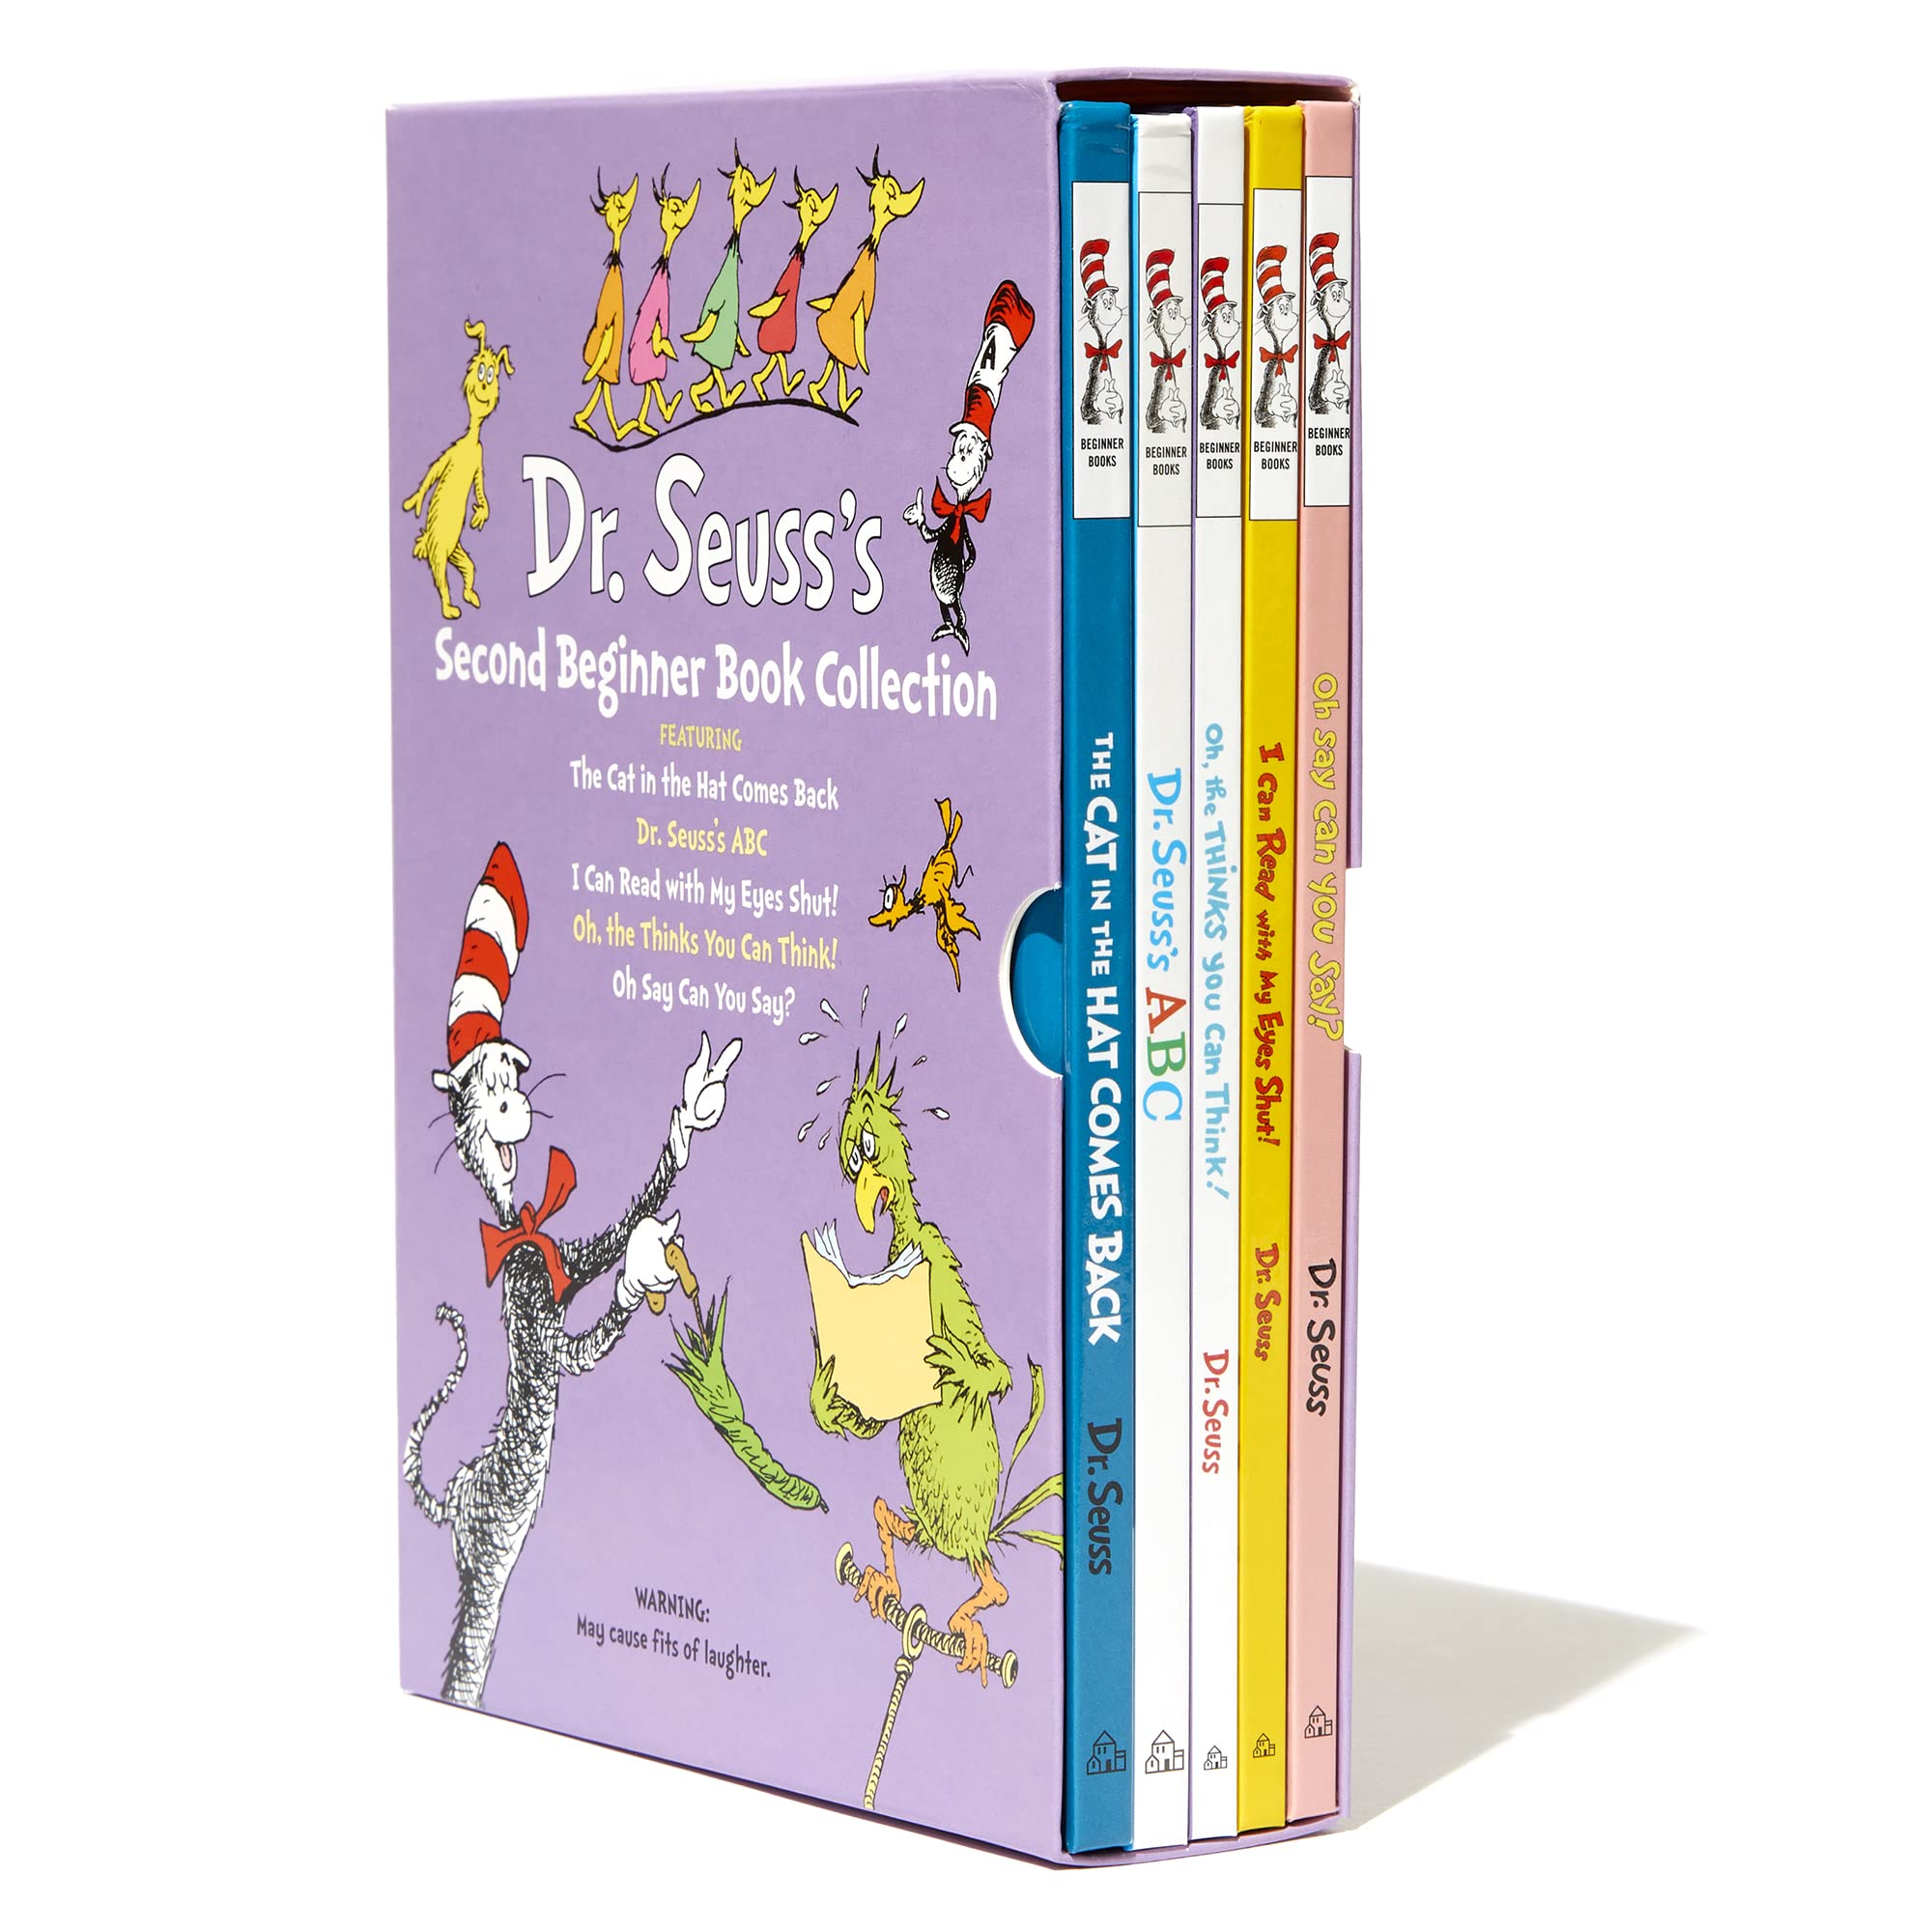 Dr. Seuss's Second Beginner Book Collection: The Cat in the Hat Comes Back; Dr. Seuss's ABC; I Can Read with My Eyes Shut!; Oh, the Thinks You Can Think!; Oh Say Can You Say? (Beginner Books(R))